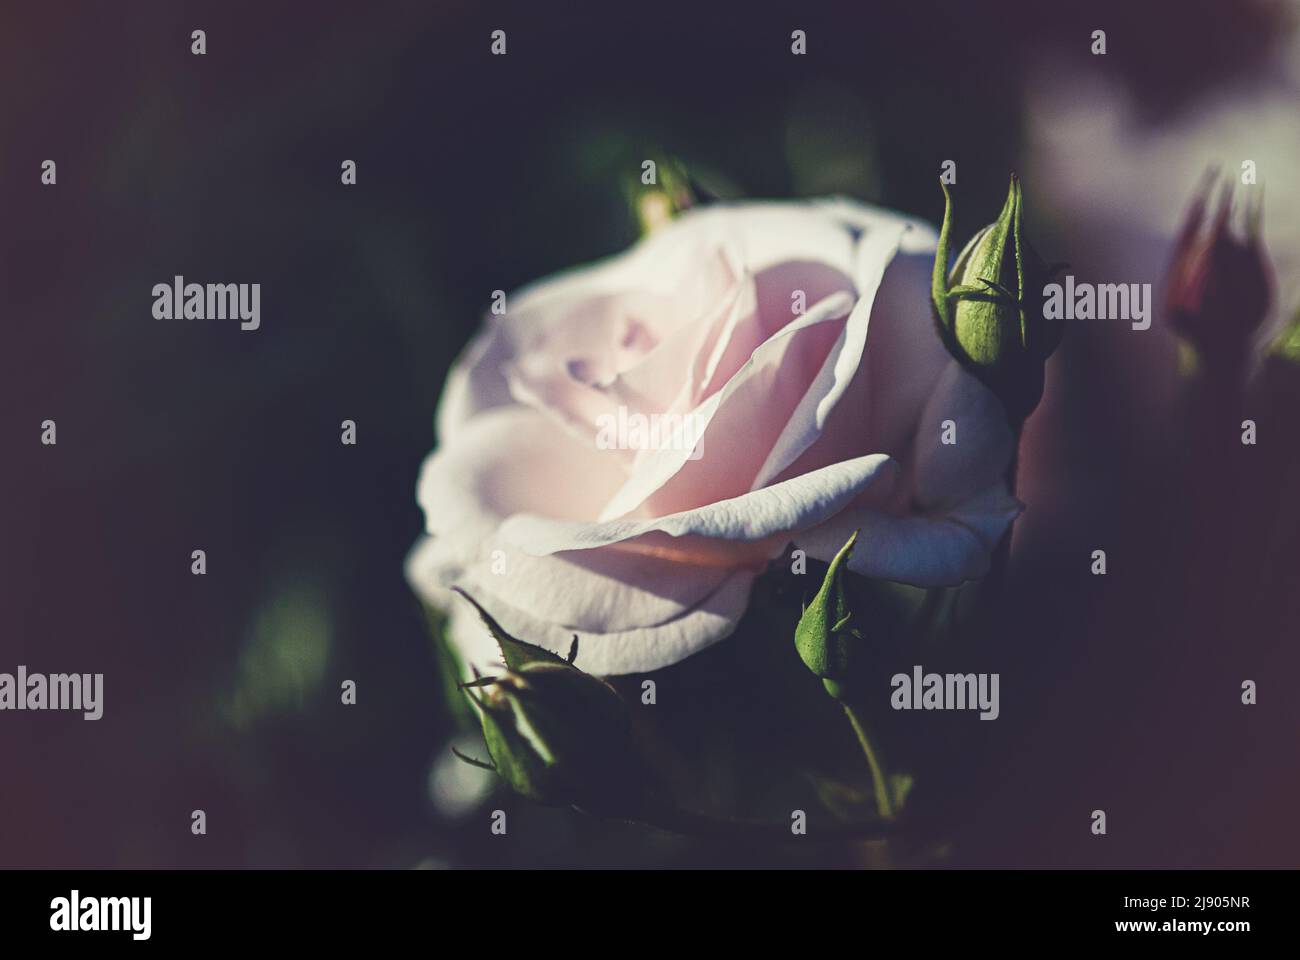 Pink garden rose with buds on dark background, copy space Stock Photo